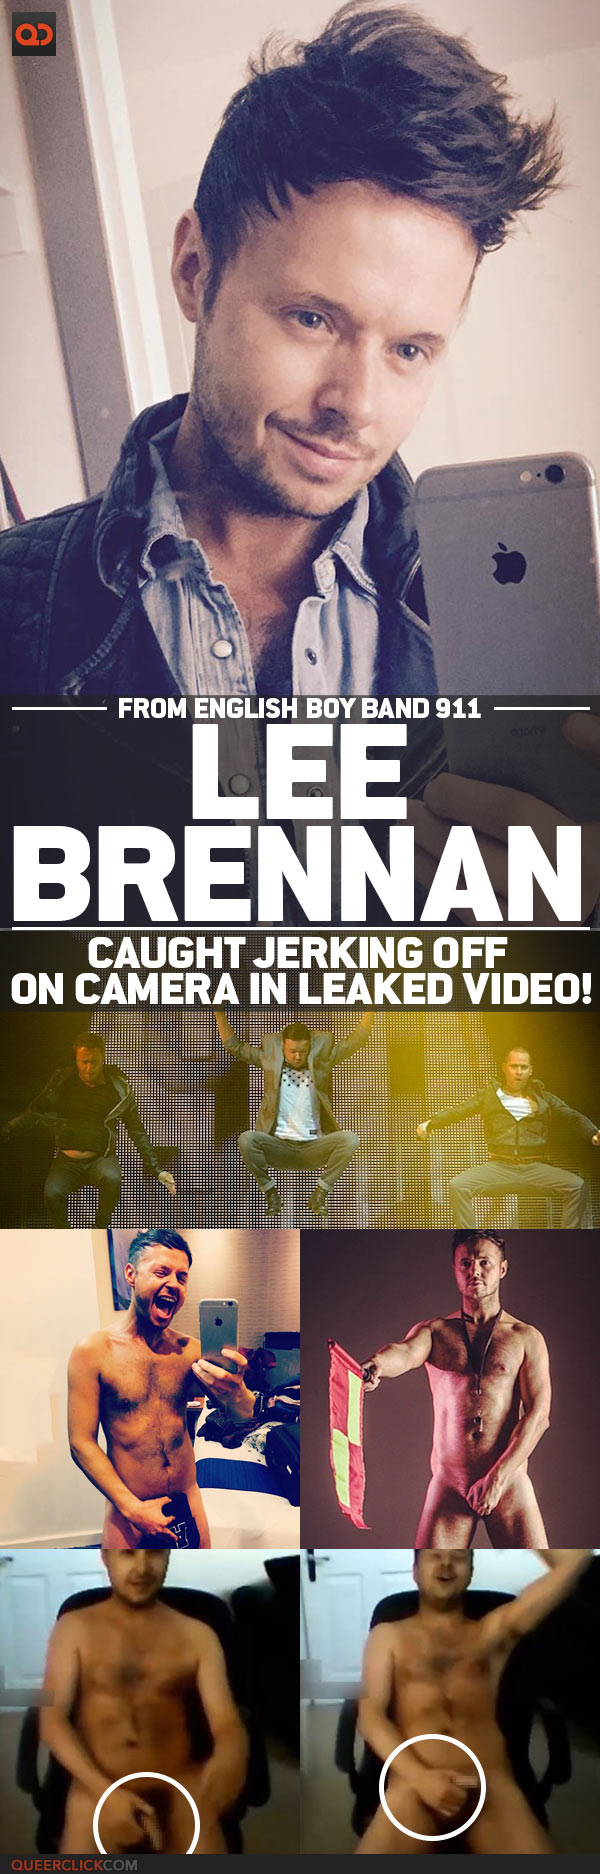 Lee Brennan, From English Boy Band 911, Caught Jerking Off On Camera In Leaked Video!